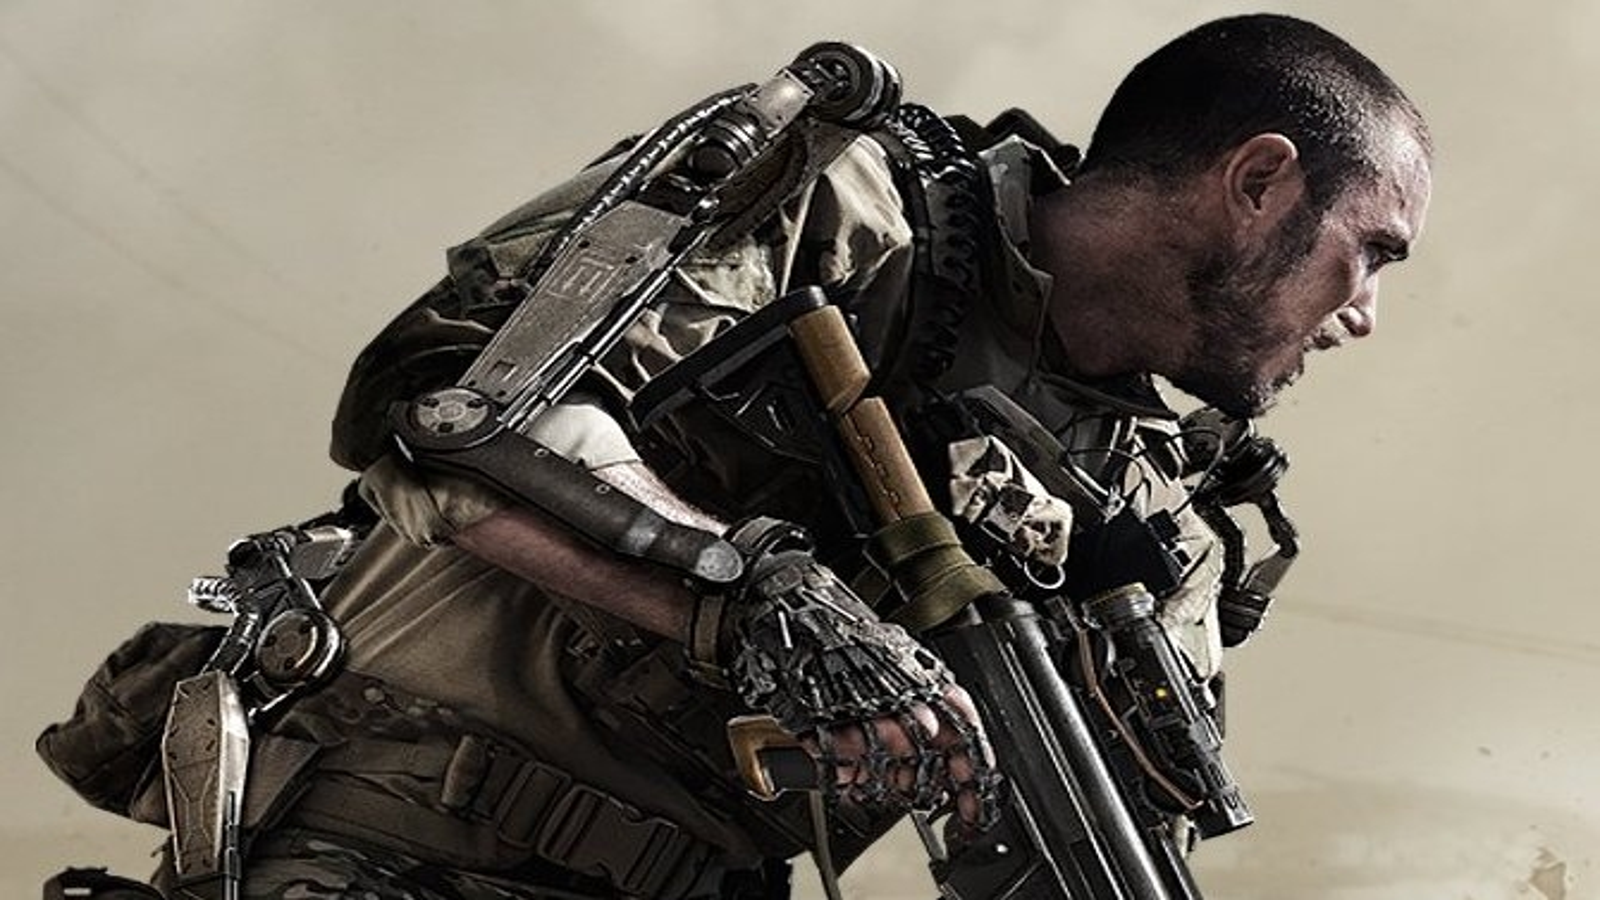 Want to play Call of Duty Advanced Warfare on Day Zero with the